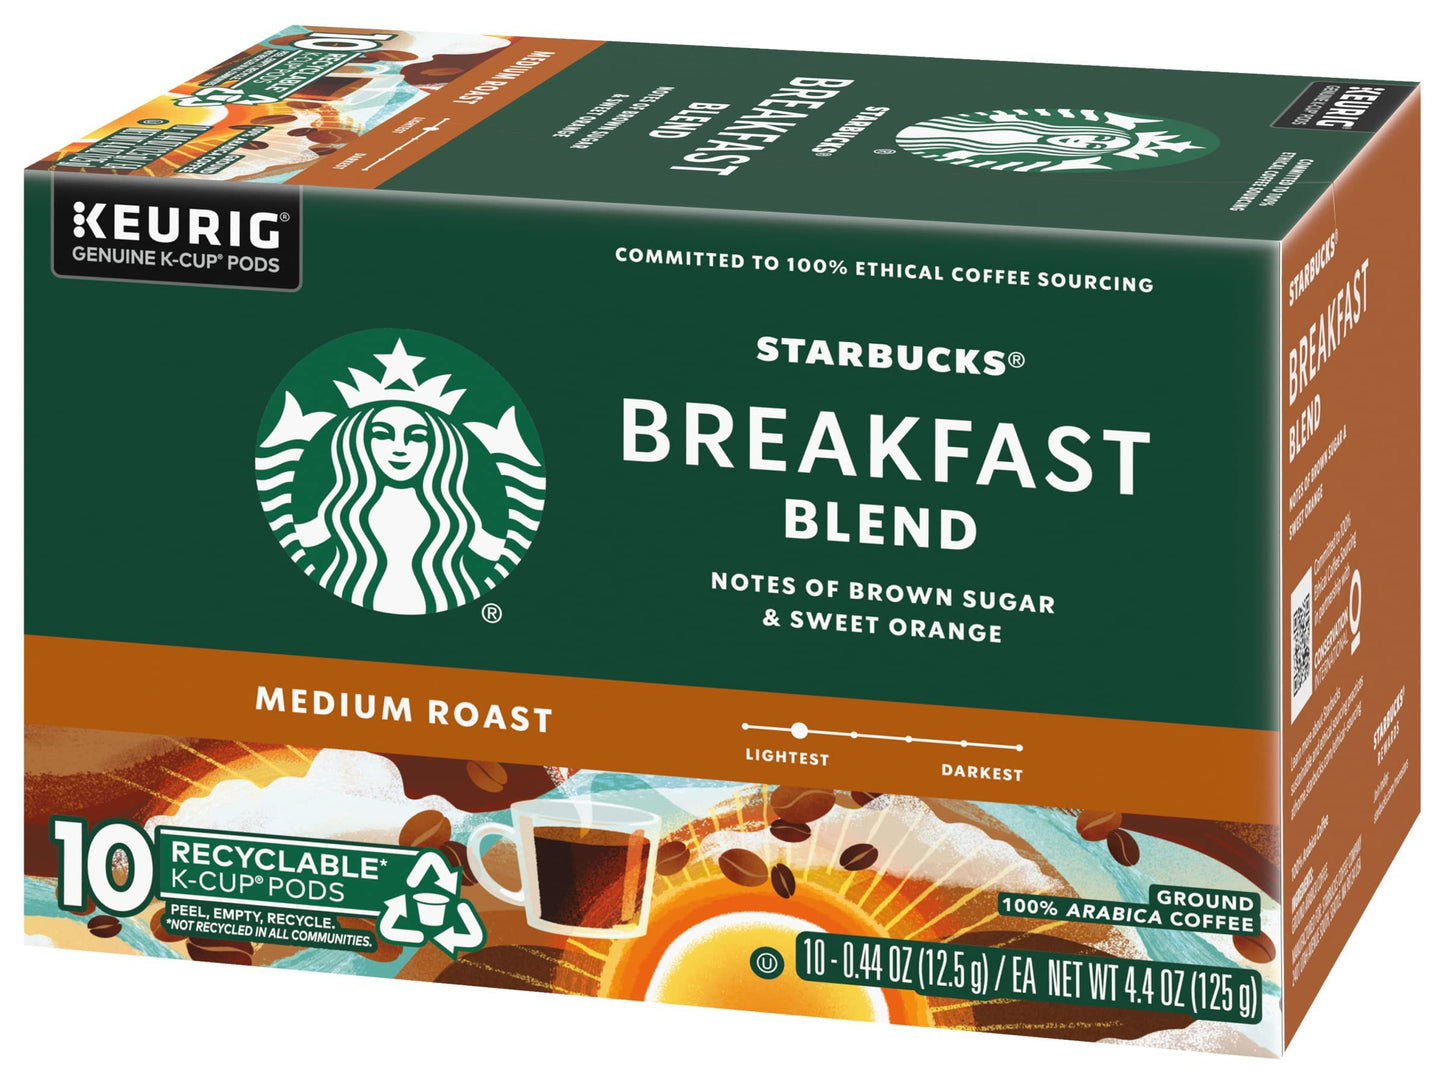 Starbucks Coffee K-Cup Pods, Breakfast Blend Medium Roast, Ground Coffee K-Cup Pods for Keurig Brewing System, 10 CT K-Cup Pods Per Box (Pack of 2 Boxes)